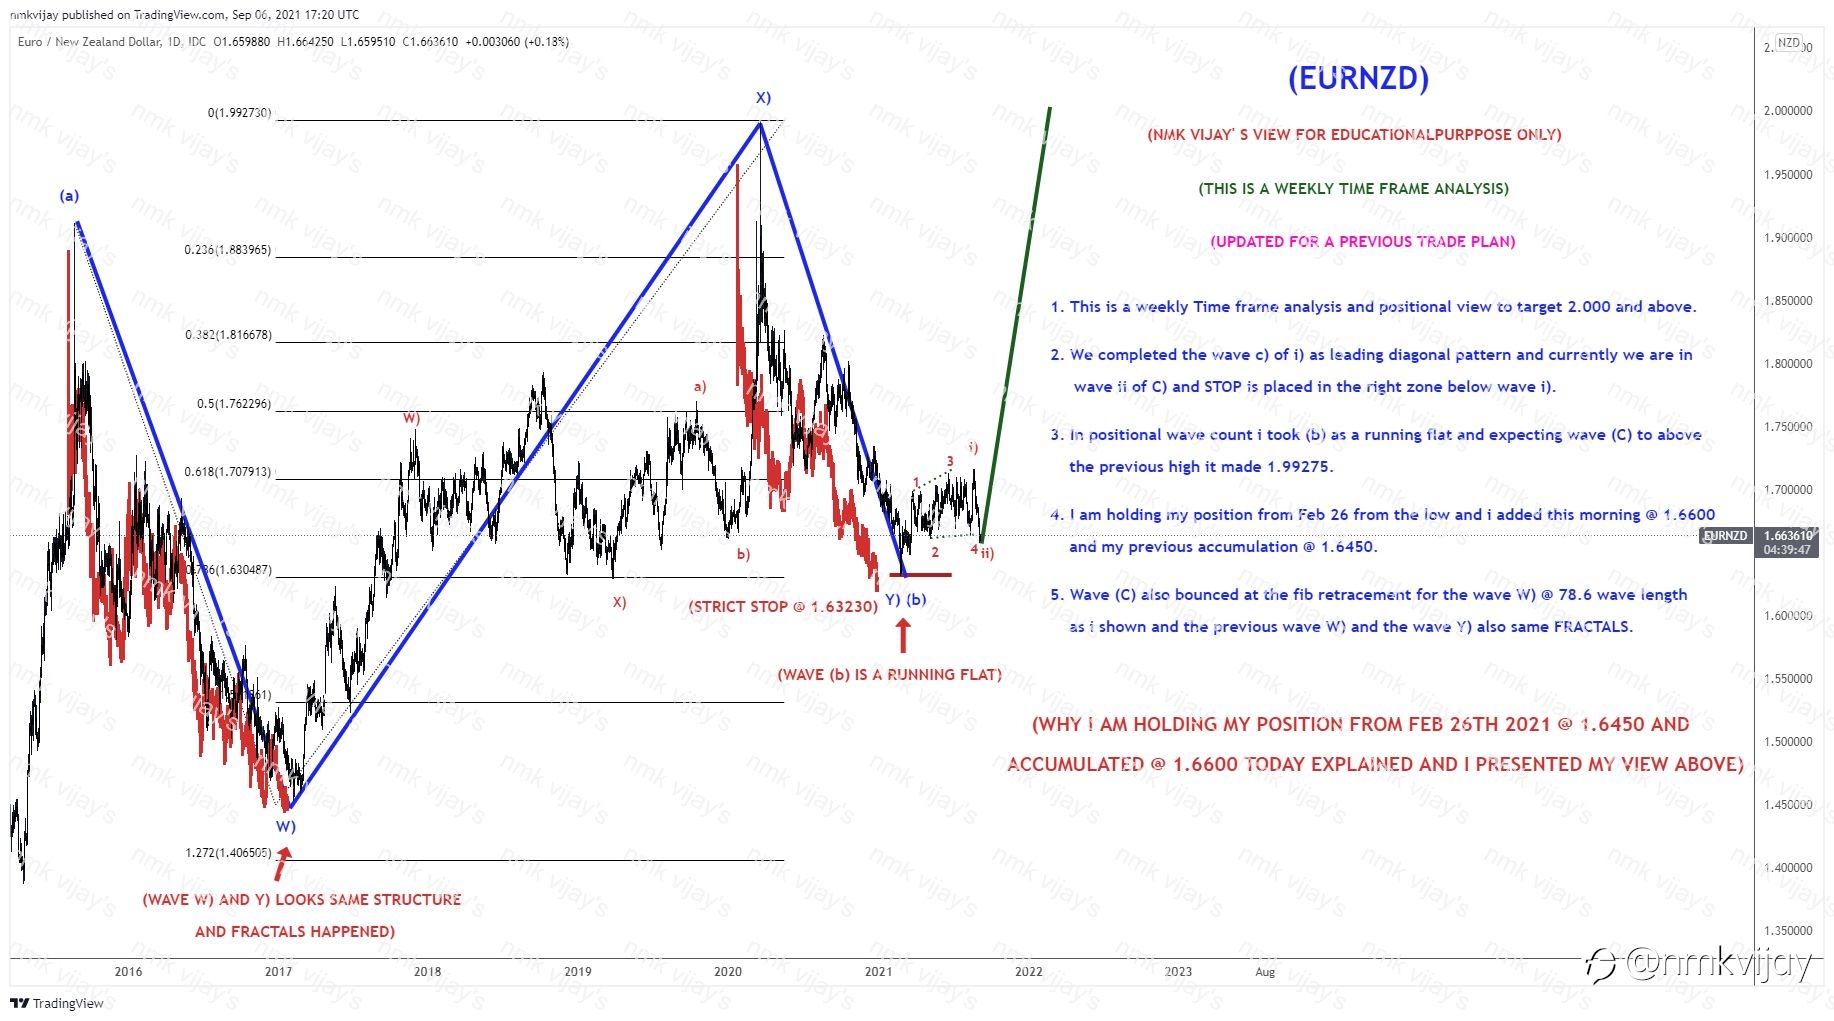 EURNZD-Weekly TF analysis STOP and Target explained here...